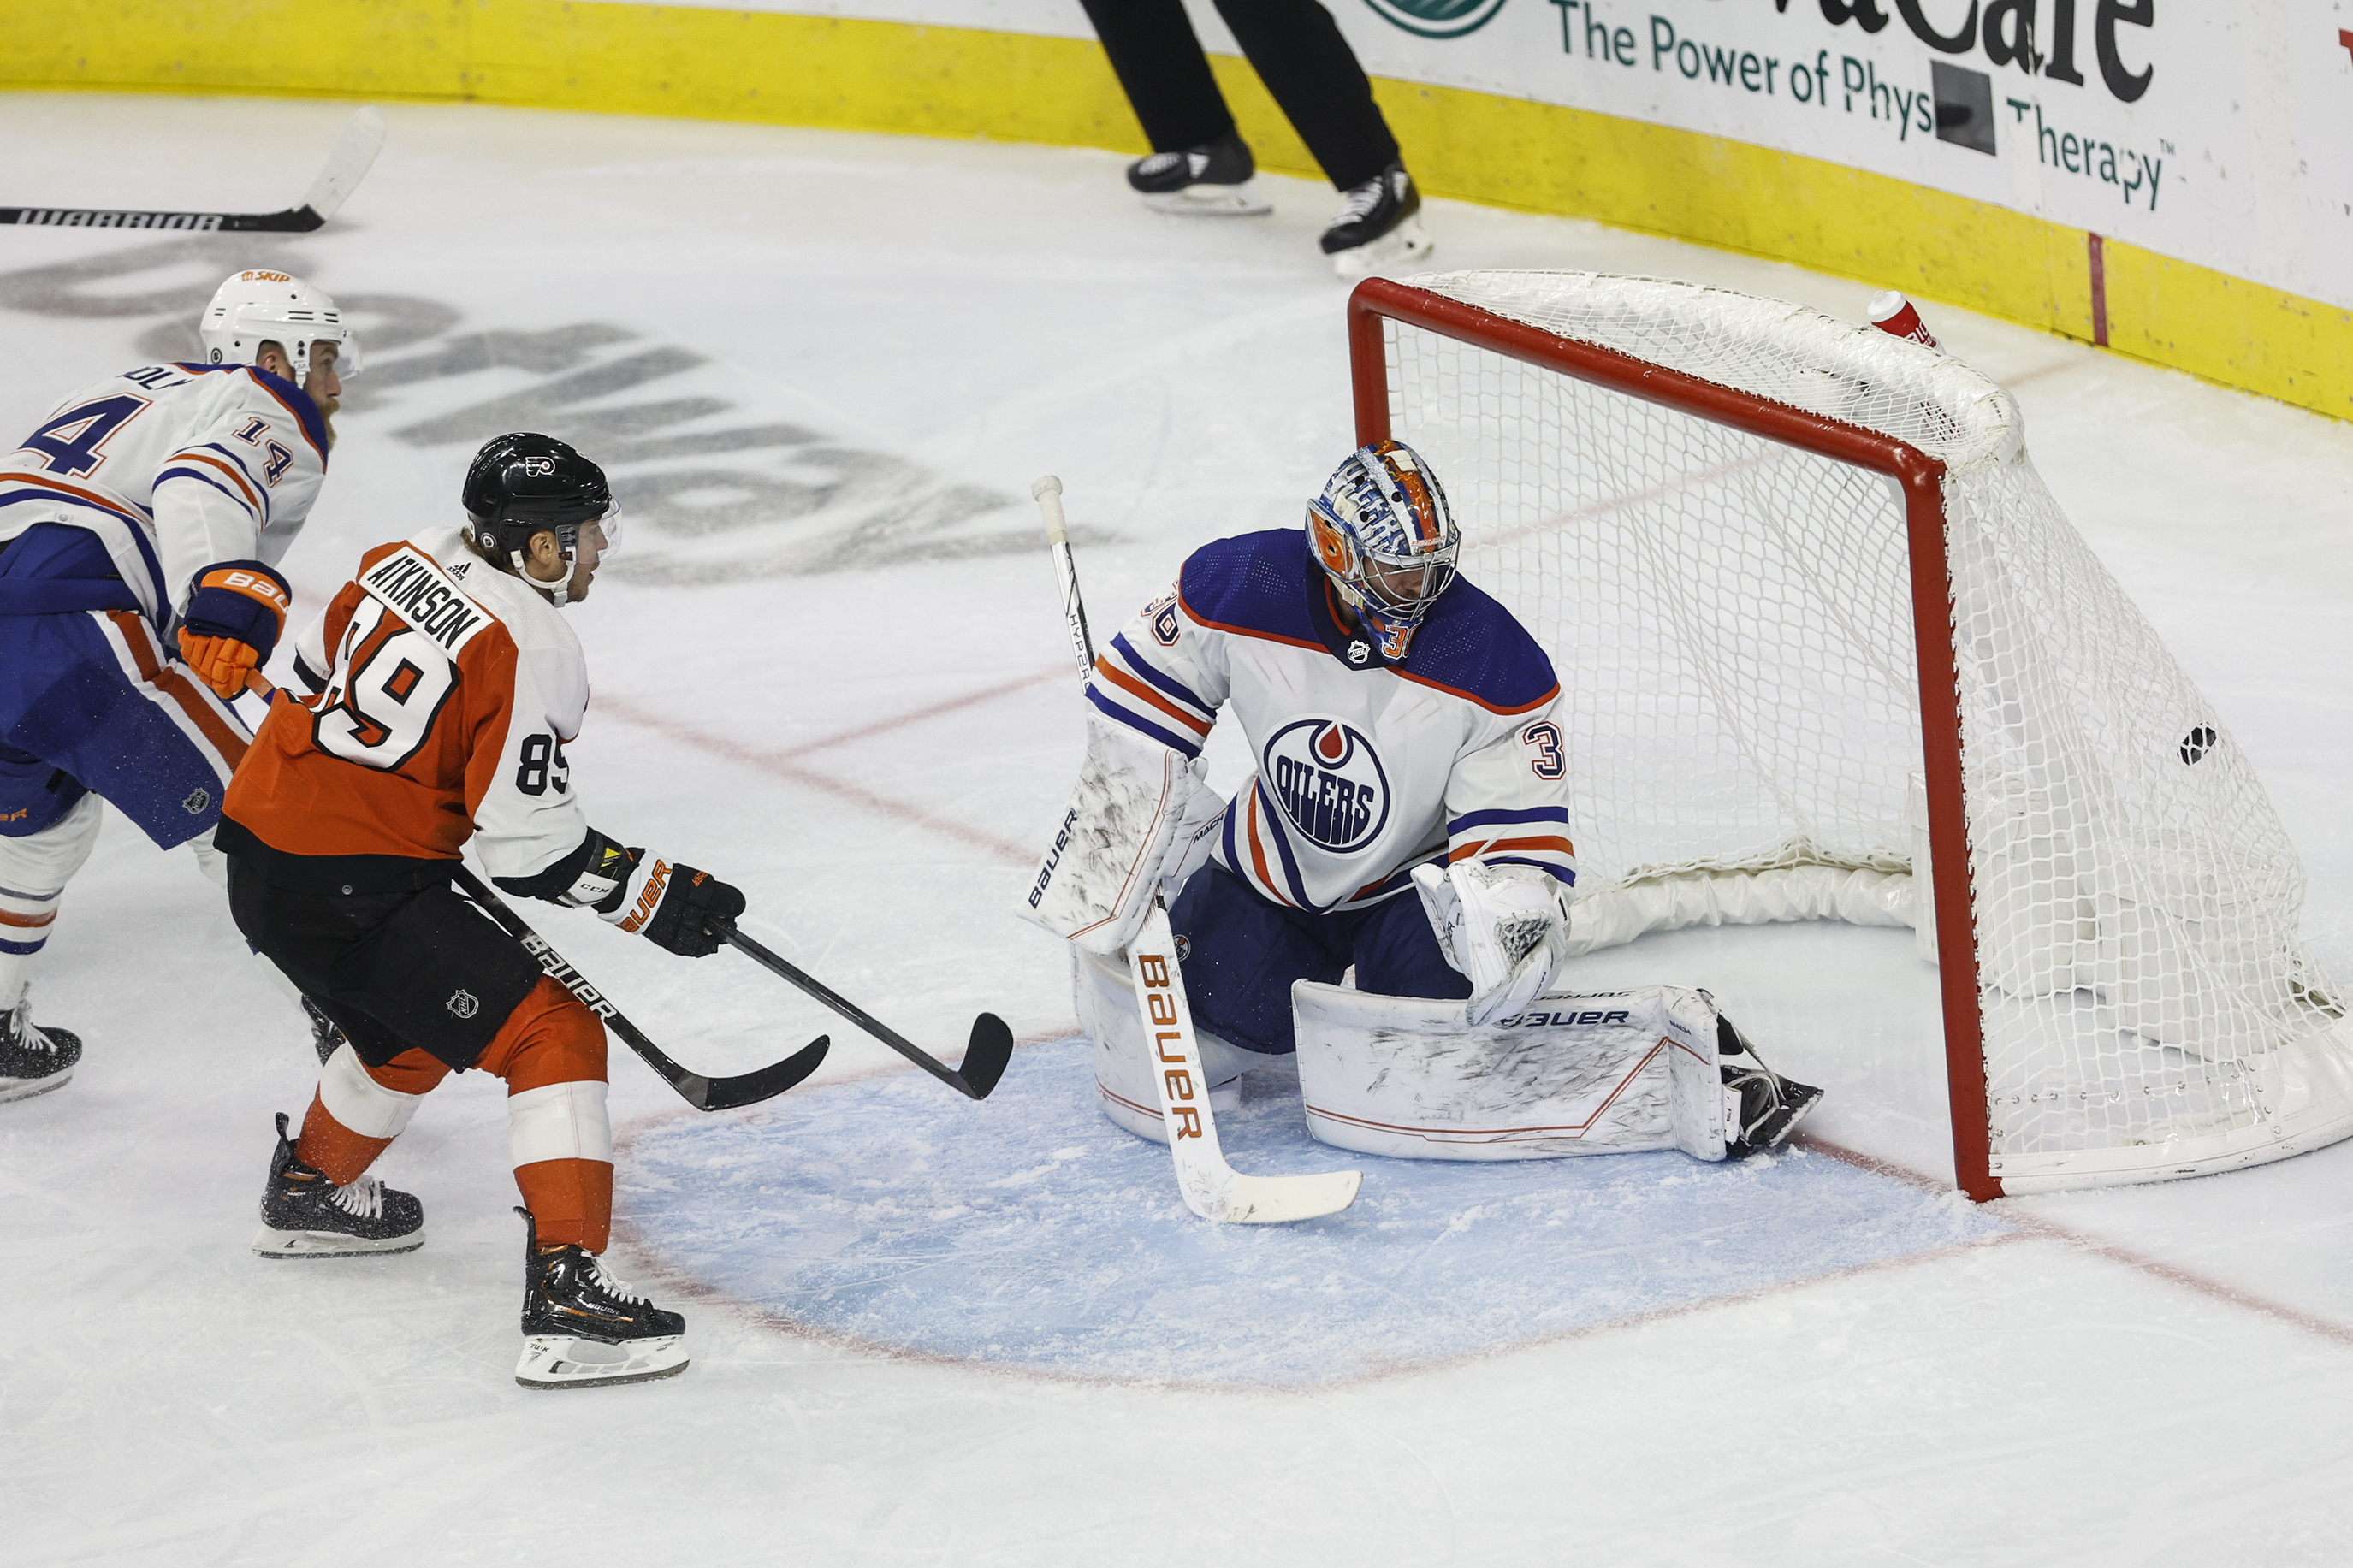 Connor McDavid had as many shots on goal as all other Oilers